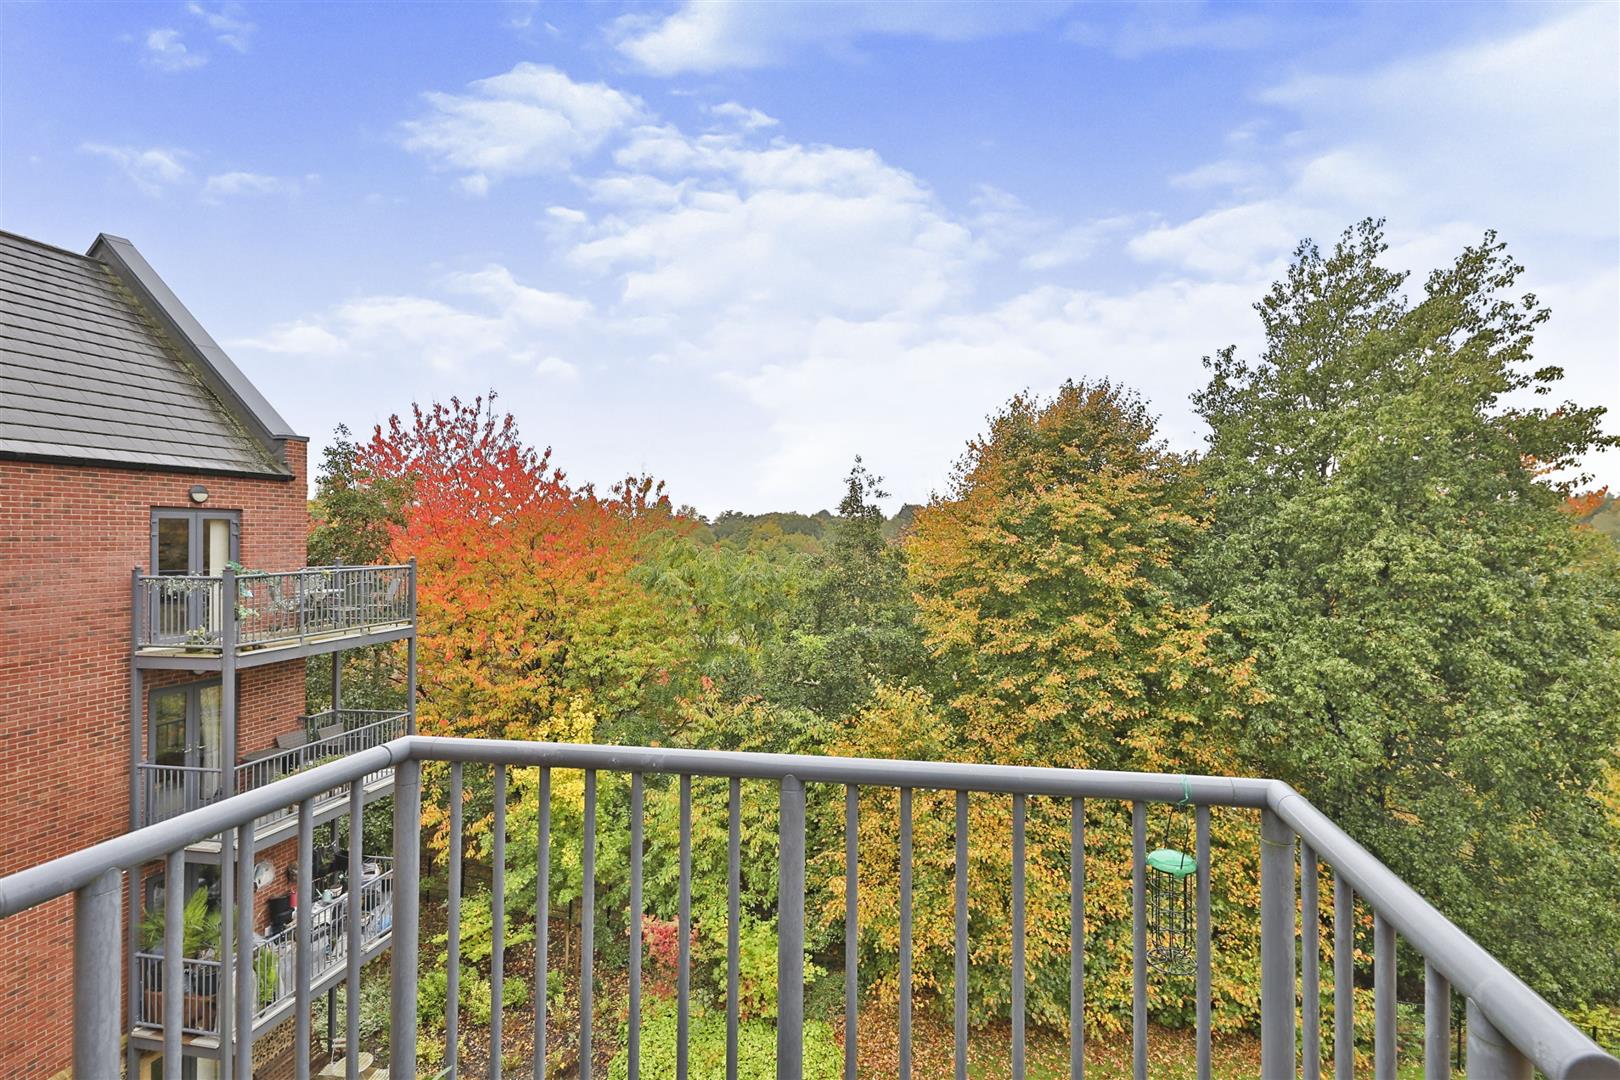 Daisy Hill Court, Westfield View, Bluebell Road, Eaton, NR4 7FL